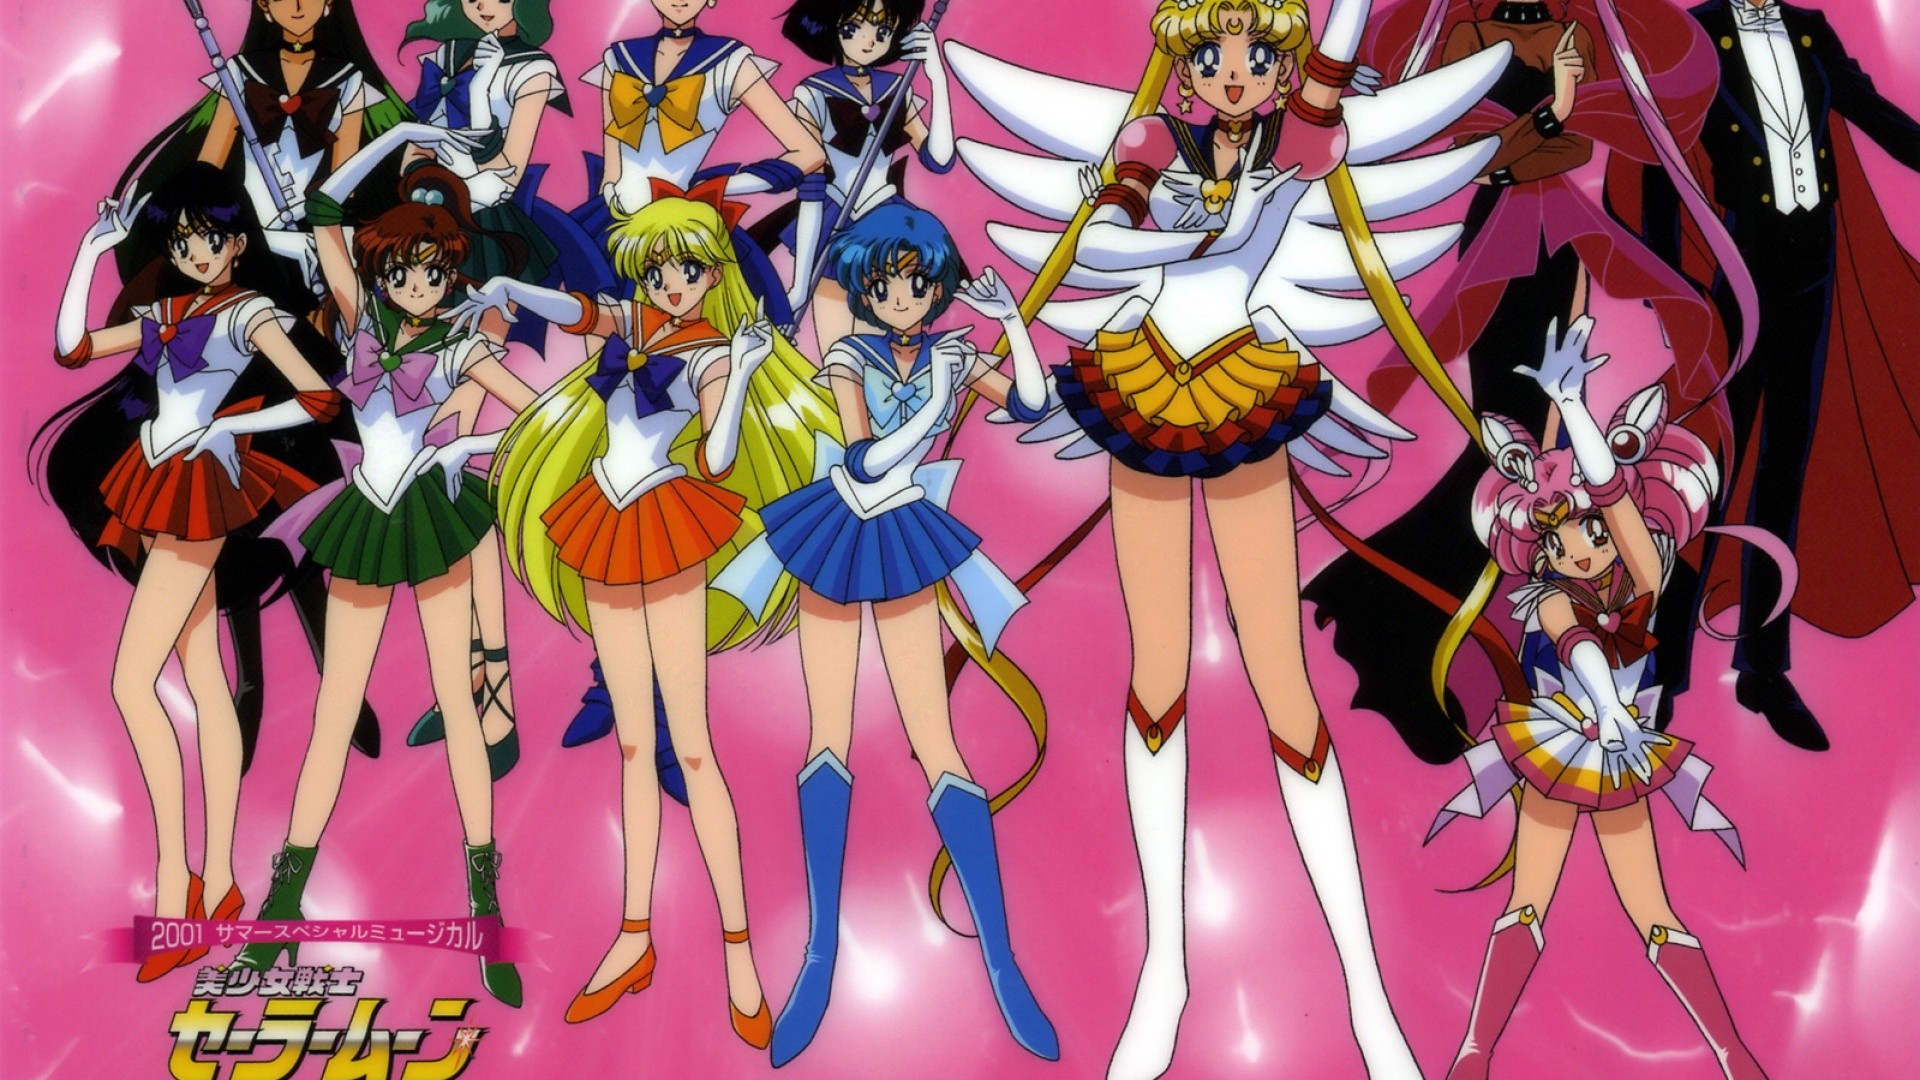 1920x1080  Sailor Moon 11. How to set wallpaper on your desktop? Click the  download link from above and set the wallpaper on the desktop from your OS.